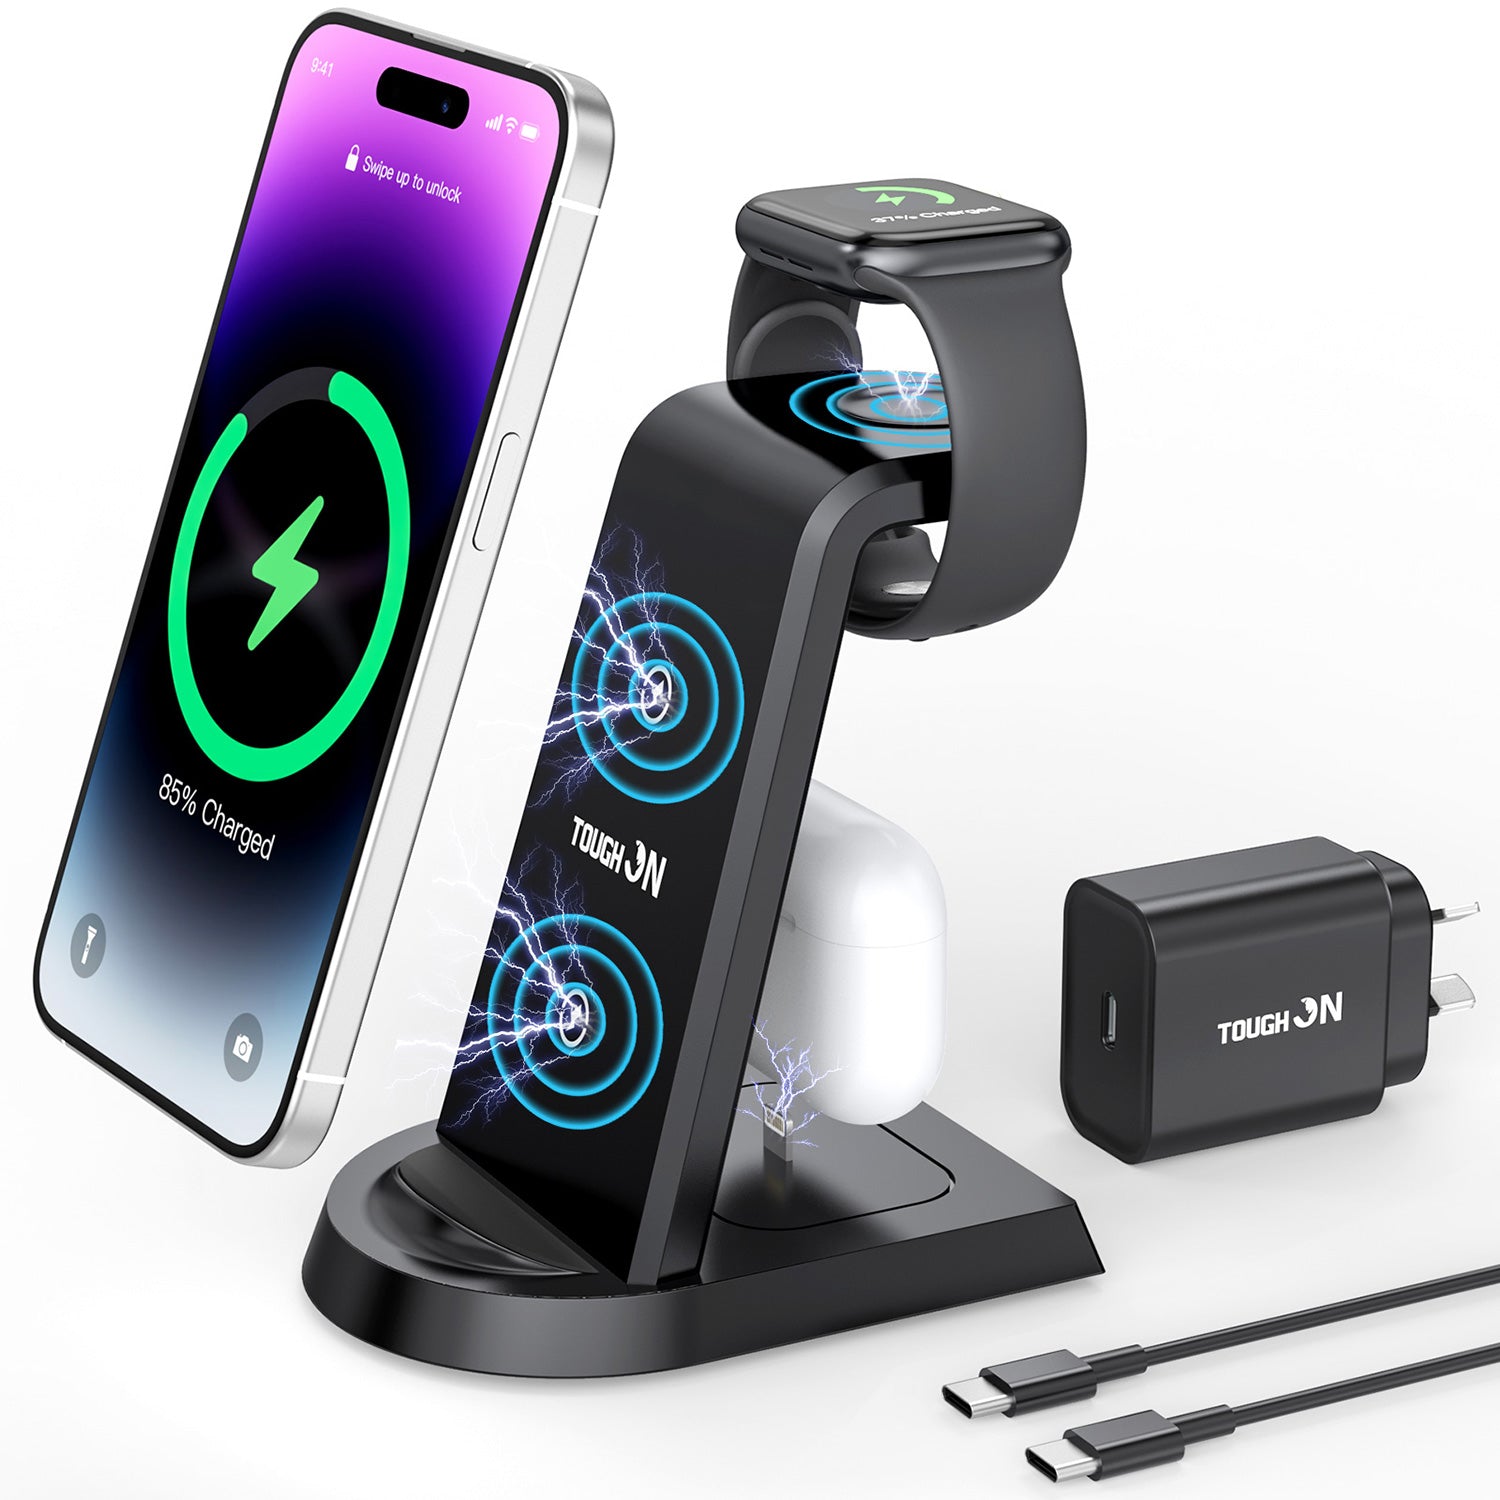 Tough On 3 in 1 Wireless Charger for iPhone Apple Watch Airpods